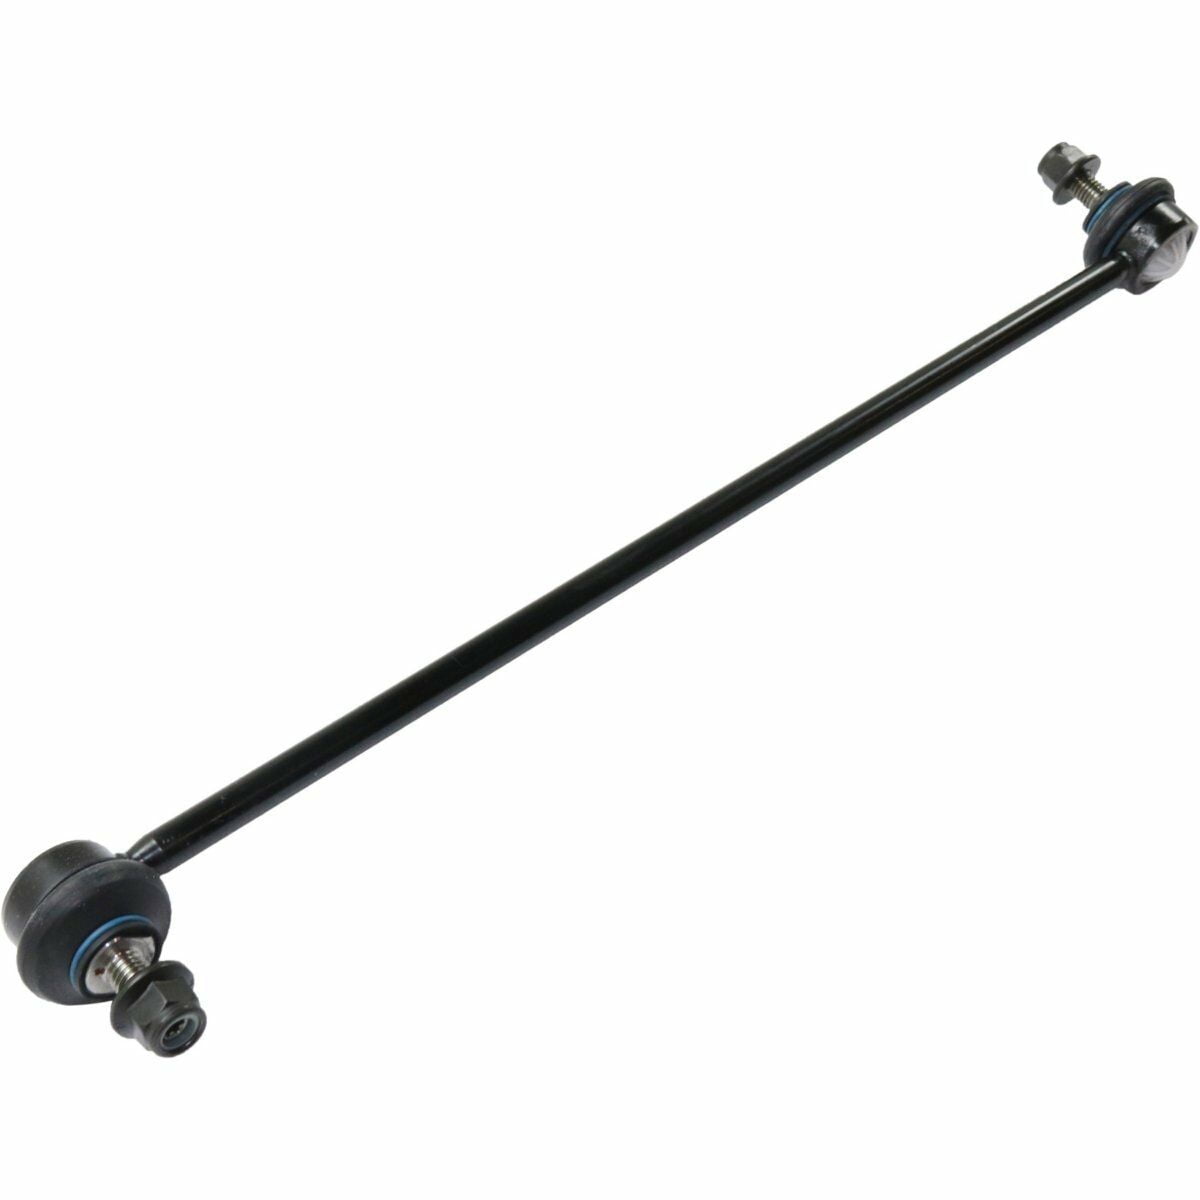 Details about   NEW FRONT LEFT SIDE SWAY BAR LINK FOR 2009-2011 BMW 535I XDRIVE 31306781549